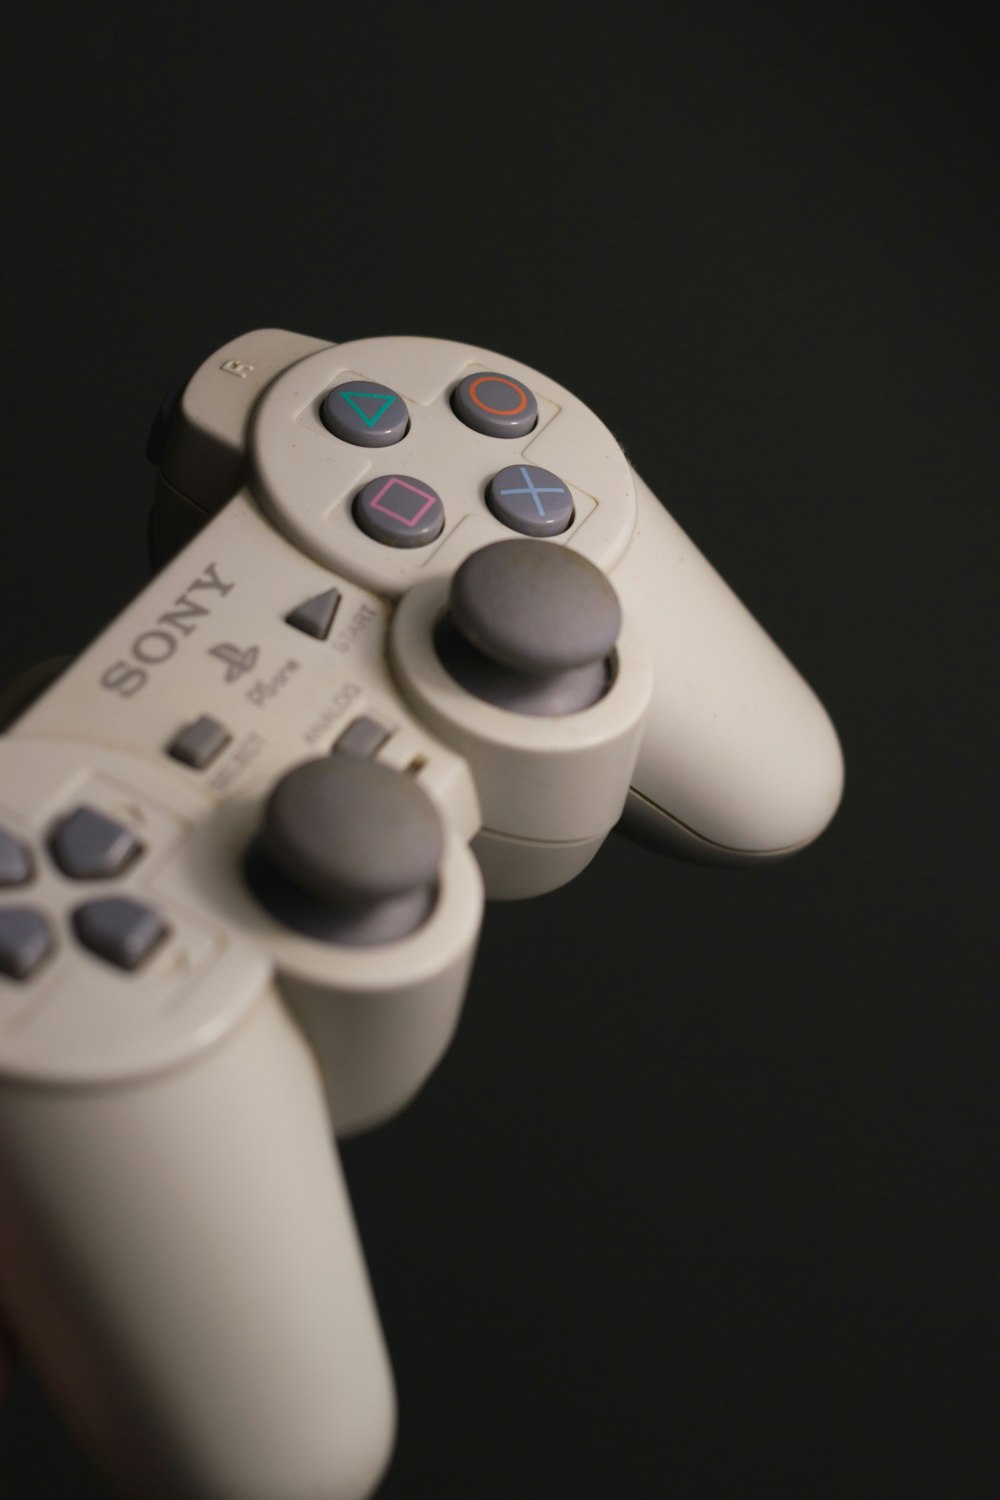 white sony ps 4 game controller